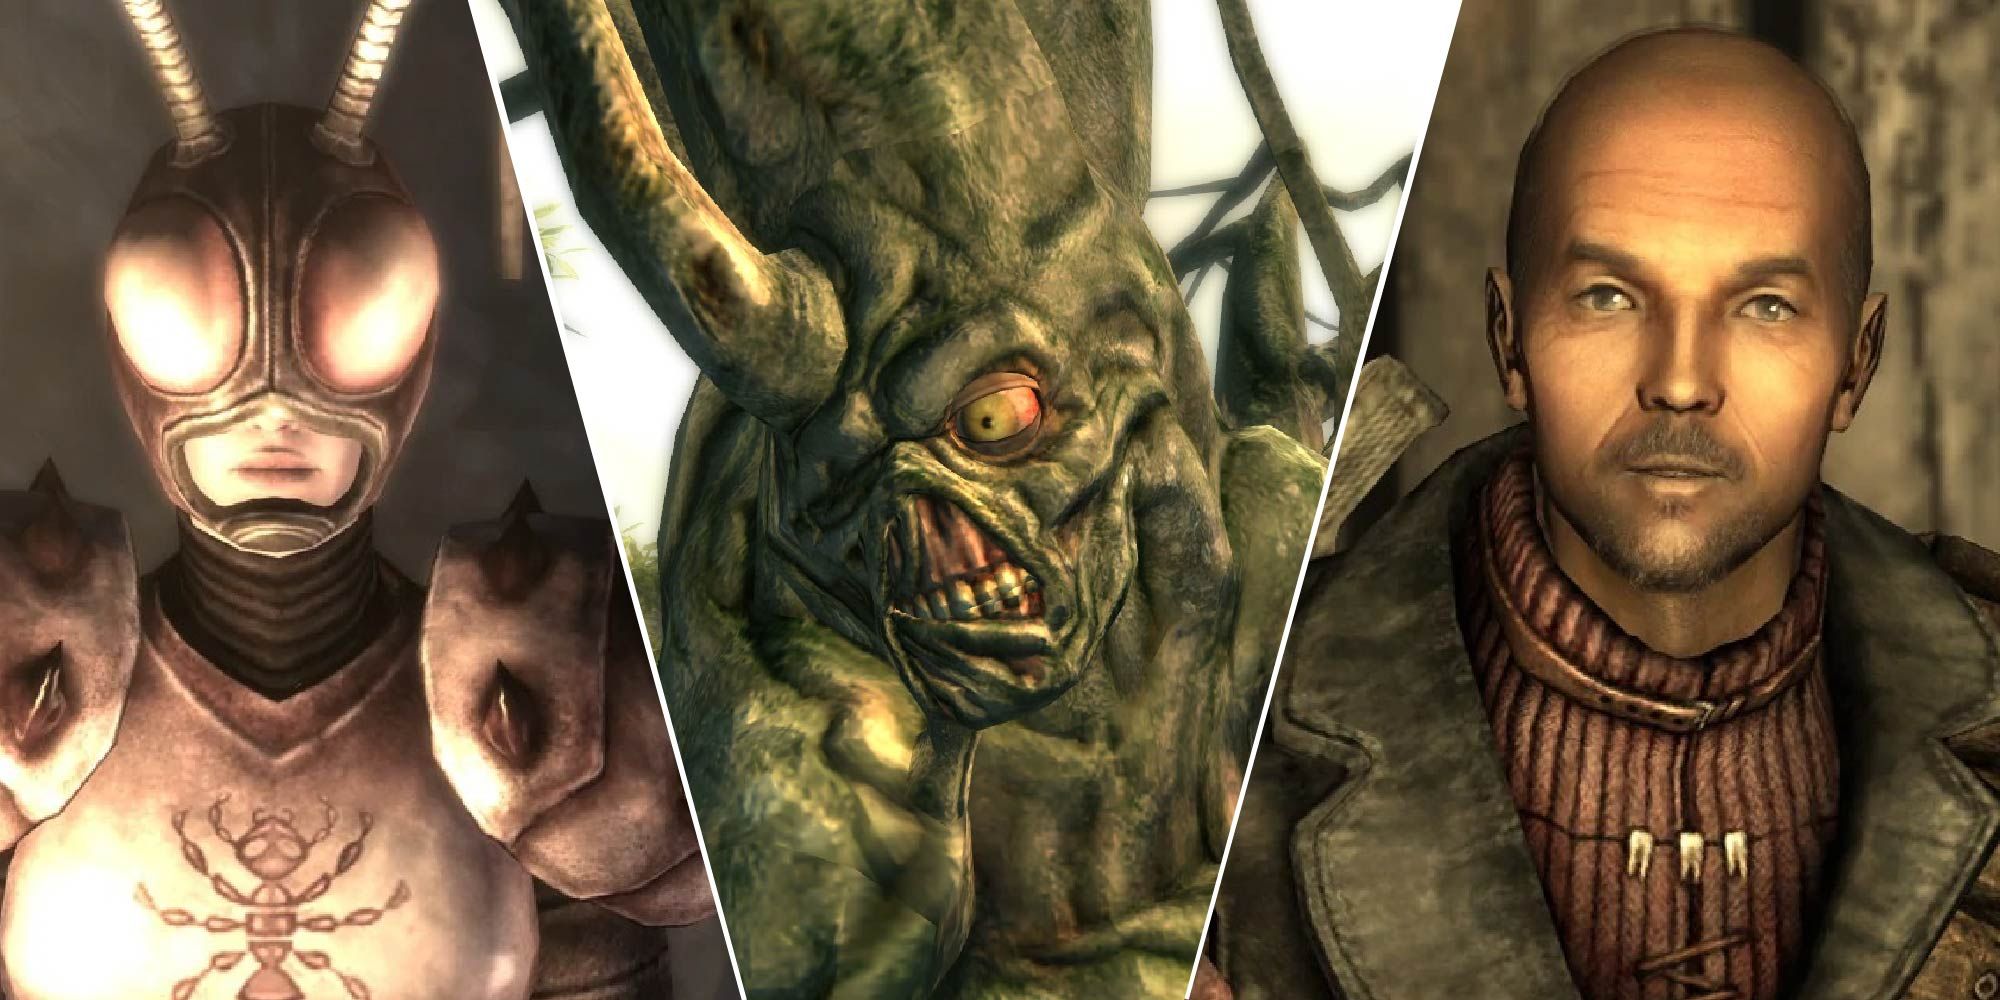 A split image featuring three Fallout 3 characters: the AntAgonizer (left), Harold (middle), and Dave (right).